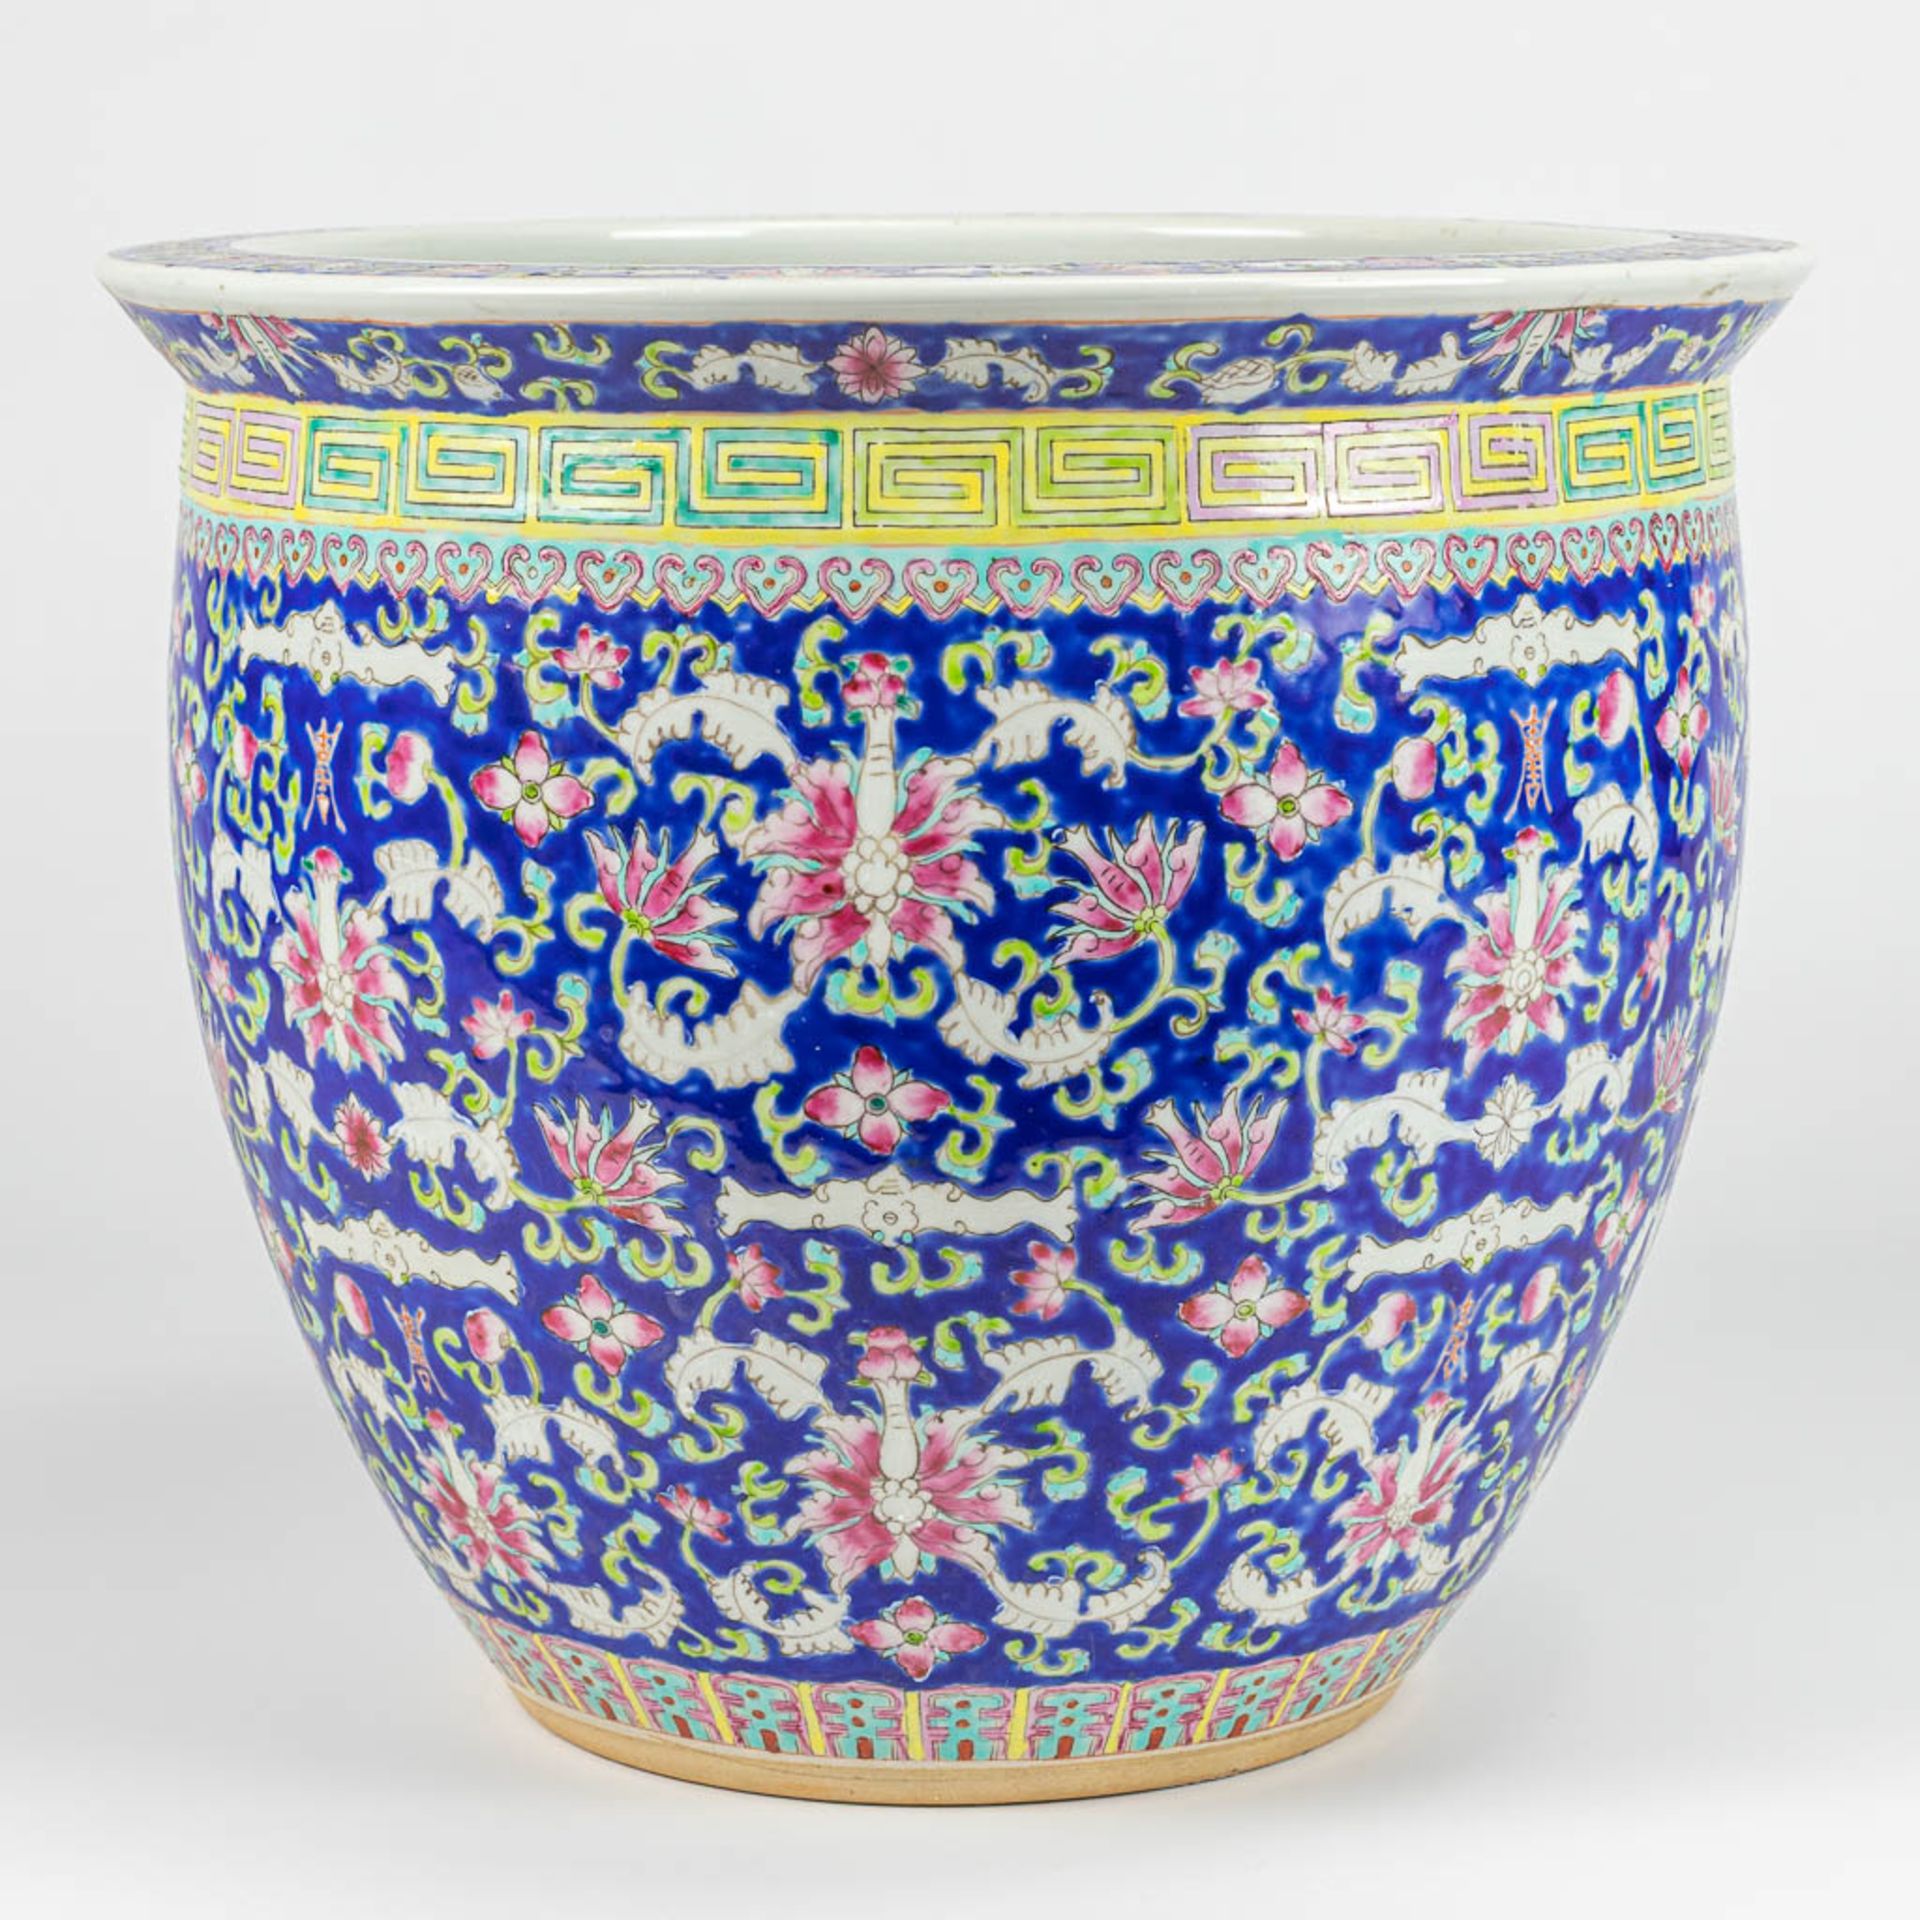 A large cache-pot made of Chinese porcelain and decorated with flowers - Image 5 of 10